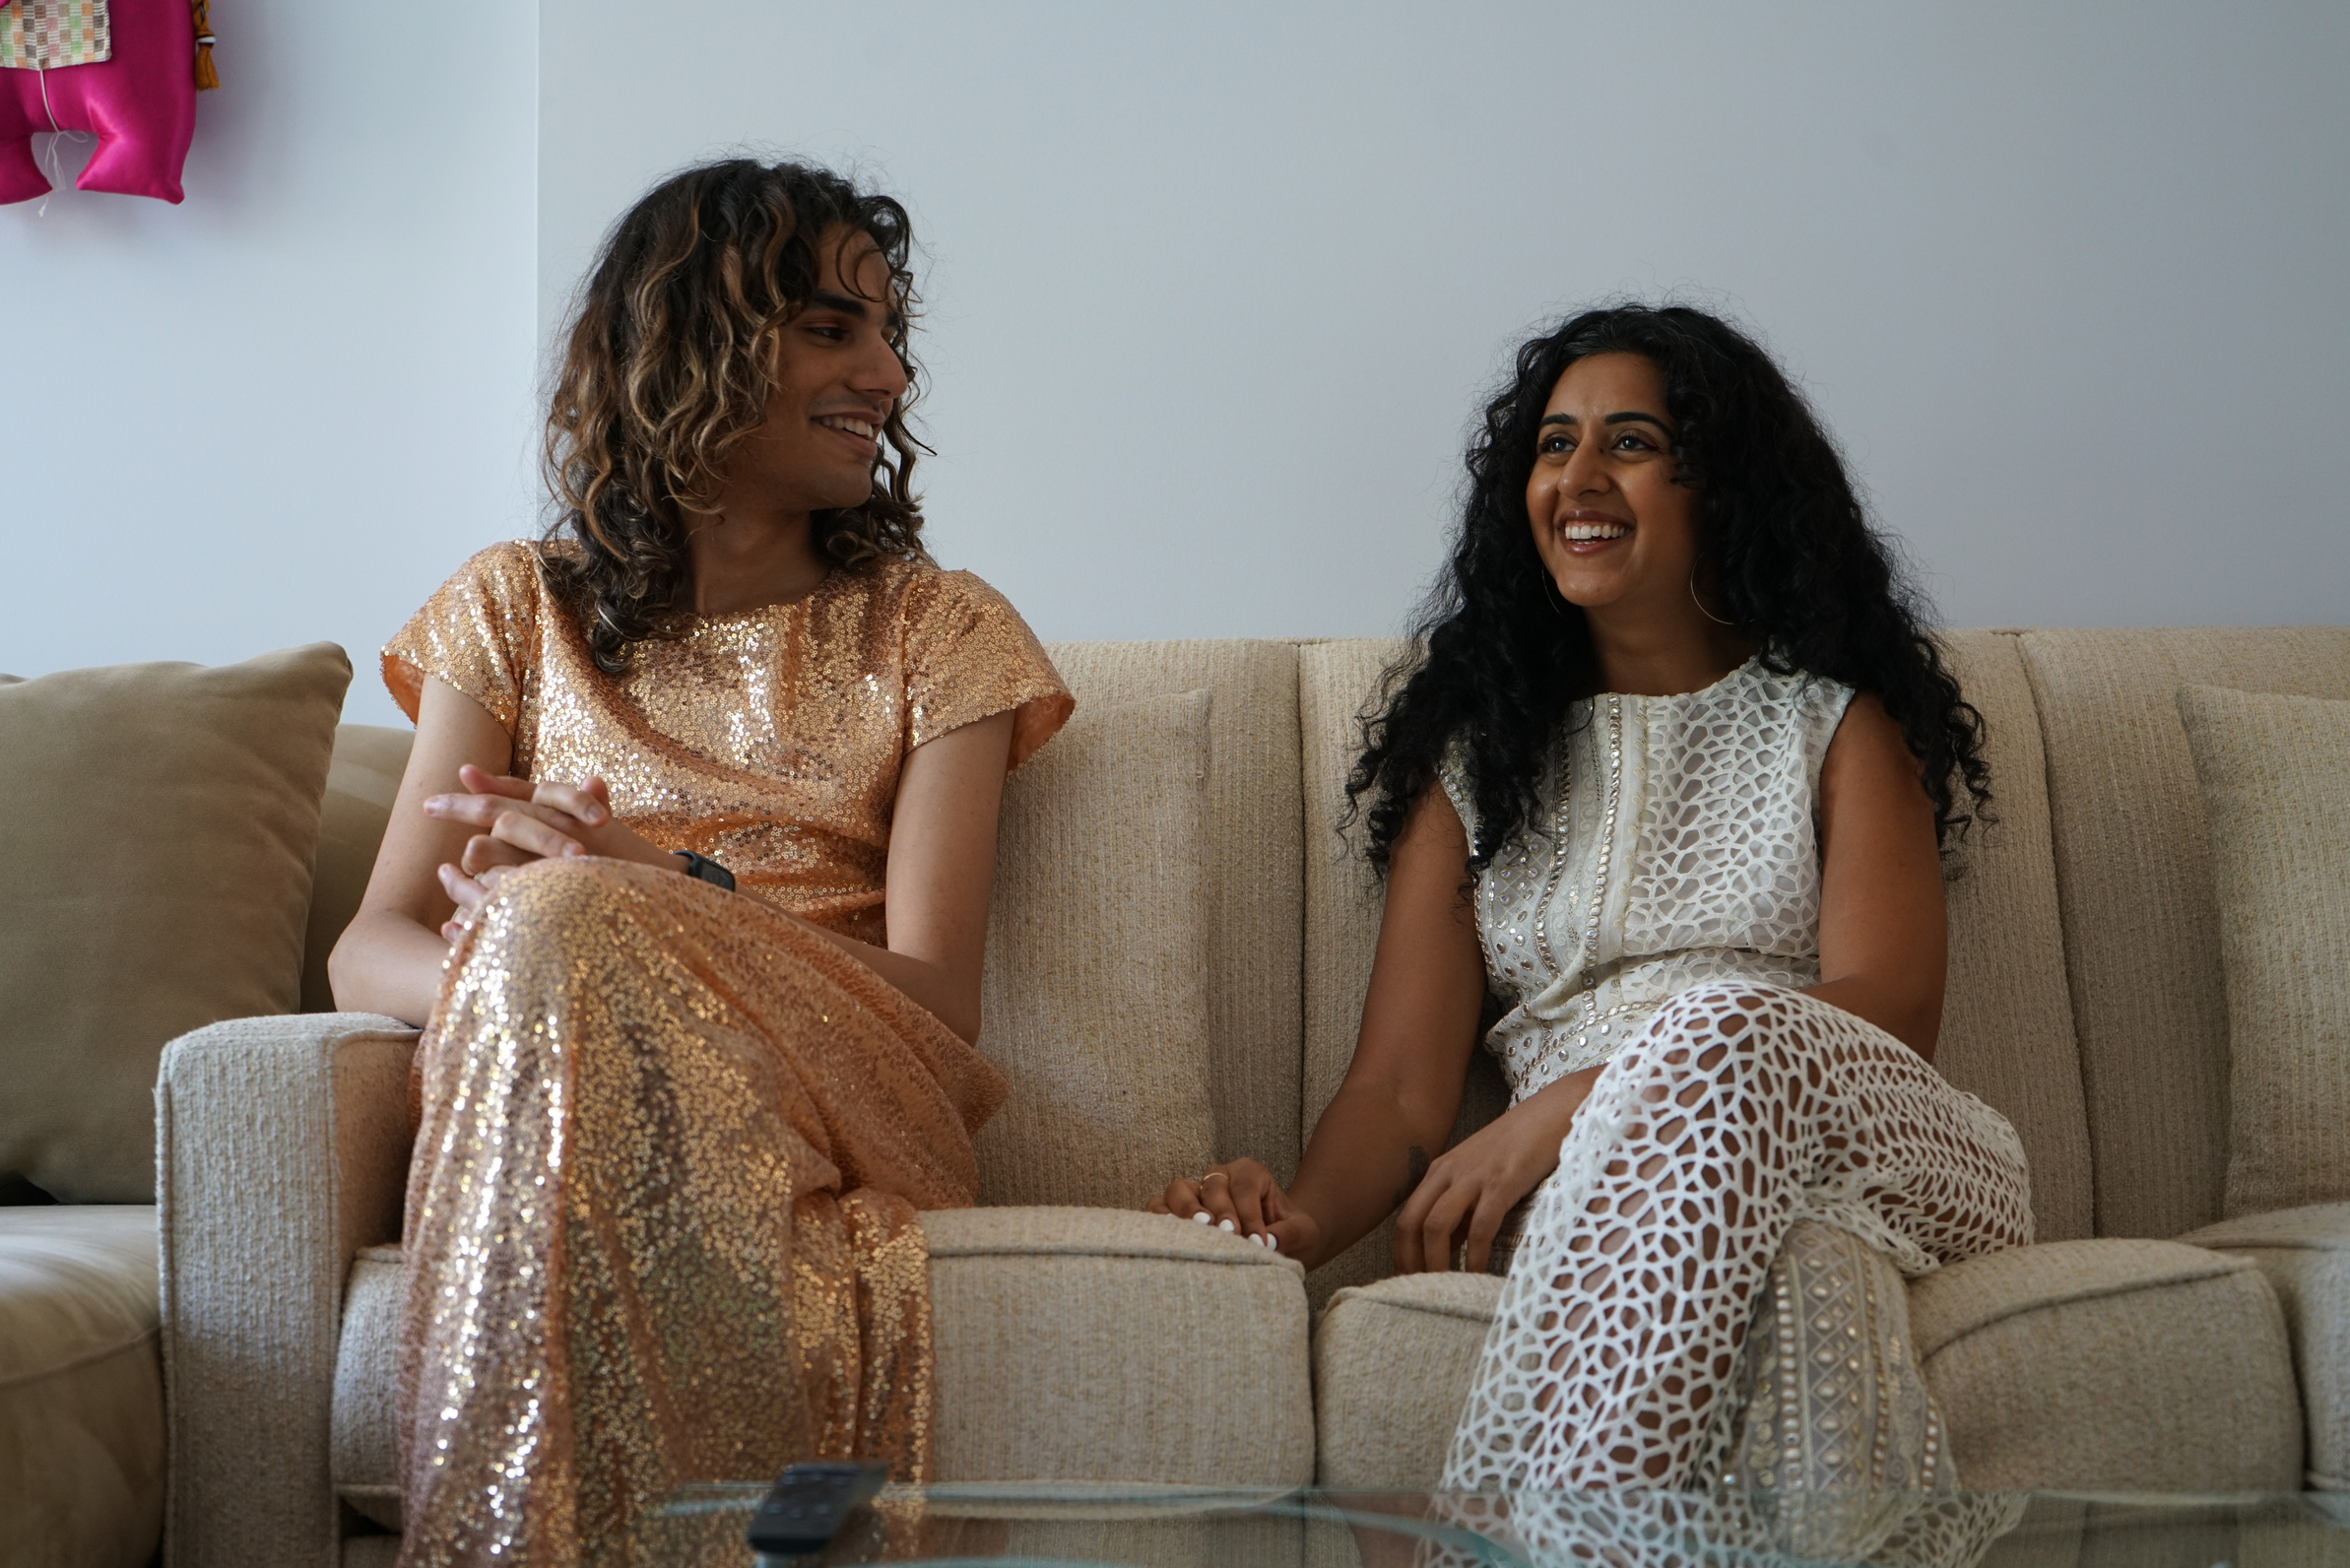 Sabrina and mayed sitting on a couch. mayed is a light brown person wearing a two piece gold sequins outfit, and has brown wavy hair with blonde highlights. sabrina is a medium brown person with black curly hair, wearing a white lace 2 piece outfit